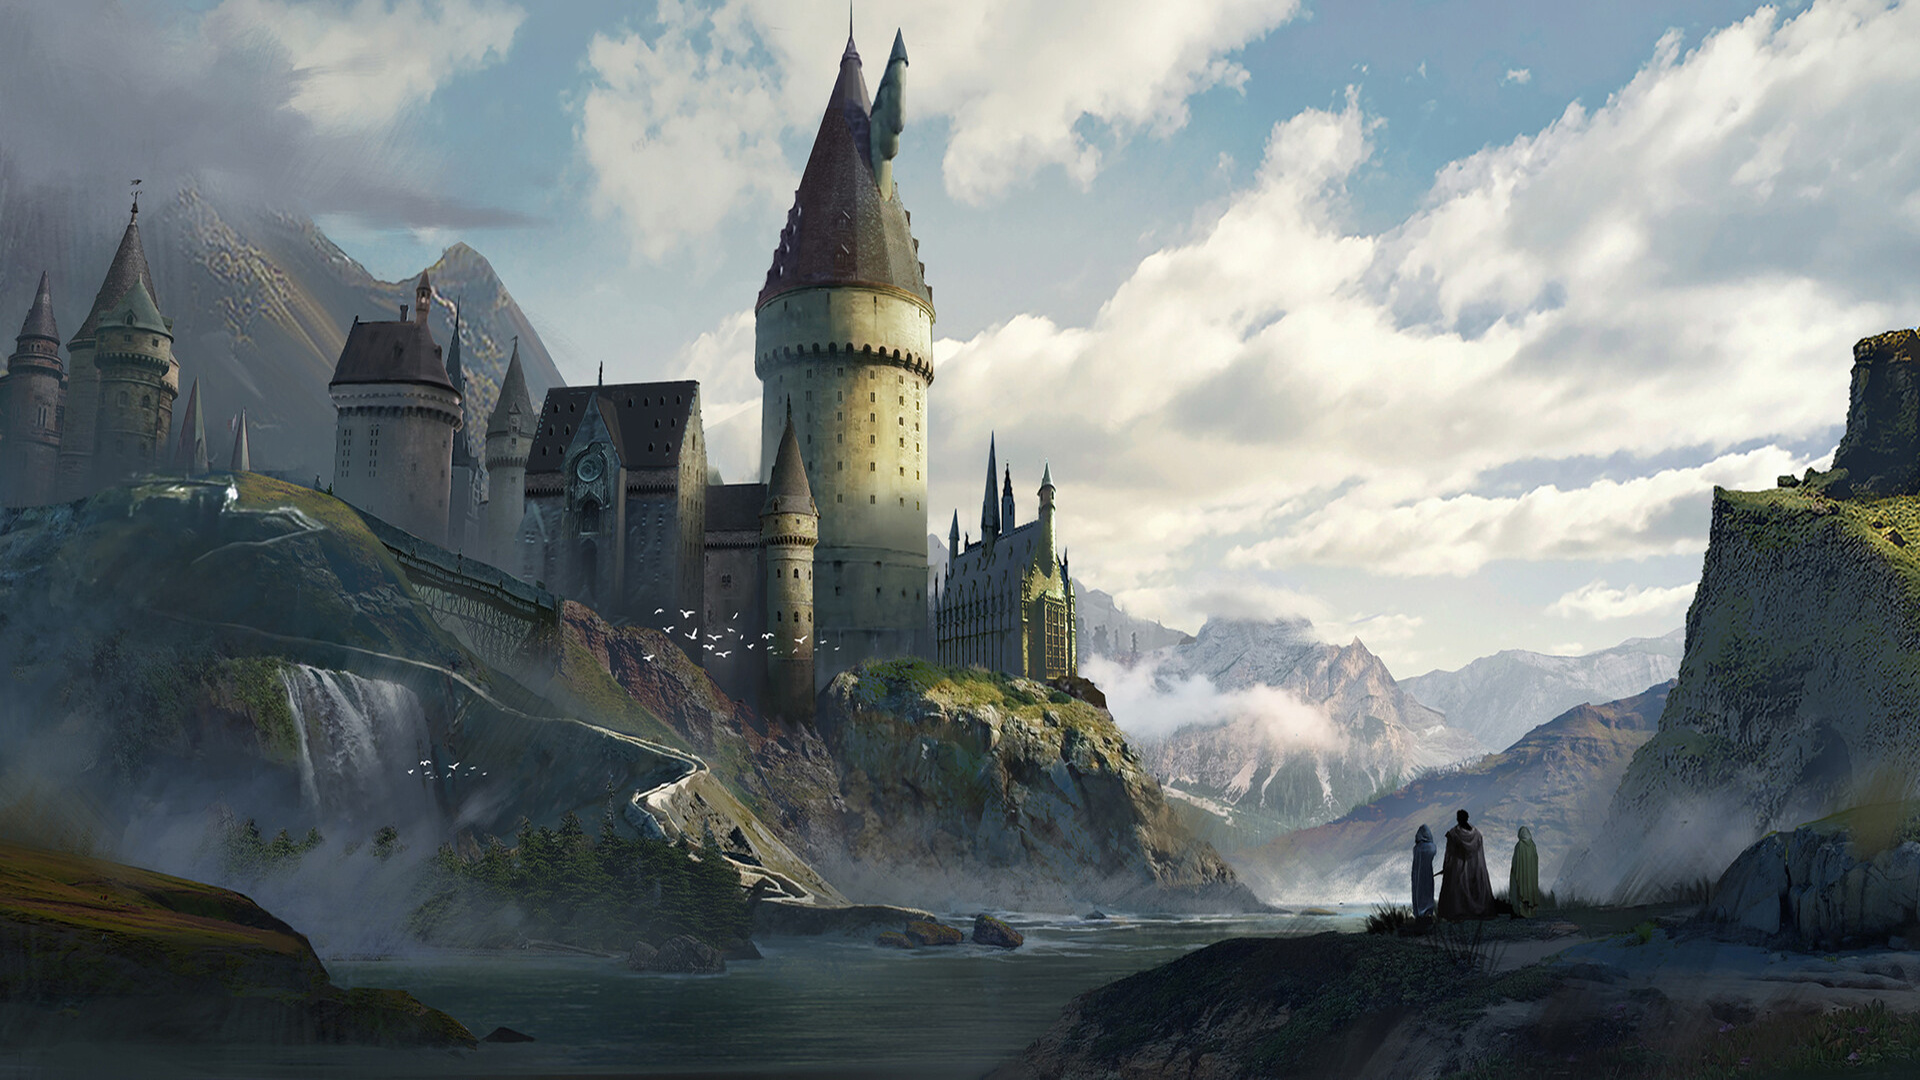 Hogwarts Castle movies, Stunning wallpapers, Iconic location, Harry Potter theme, 1920x1080 Full HD Desktop